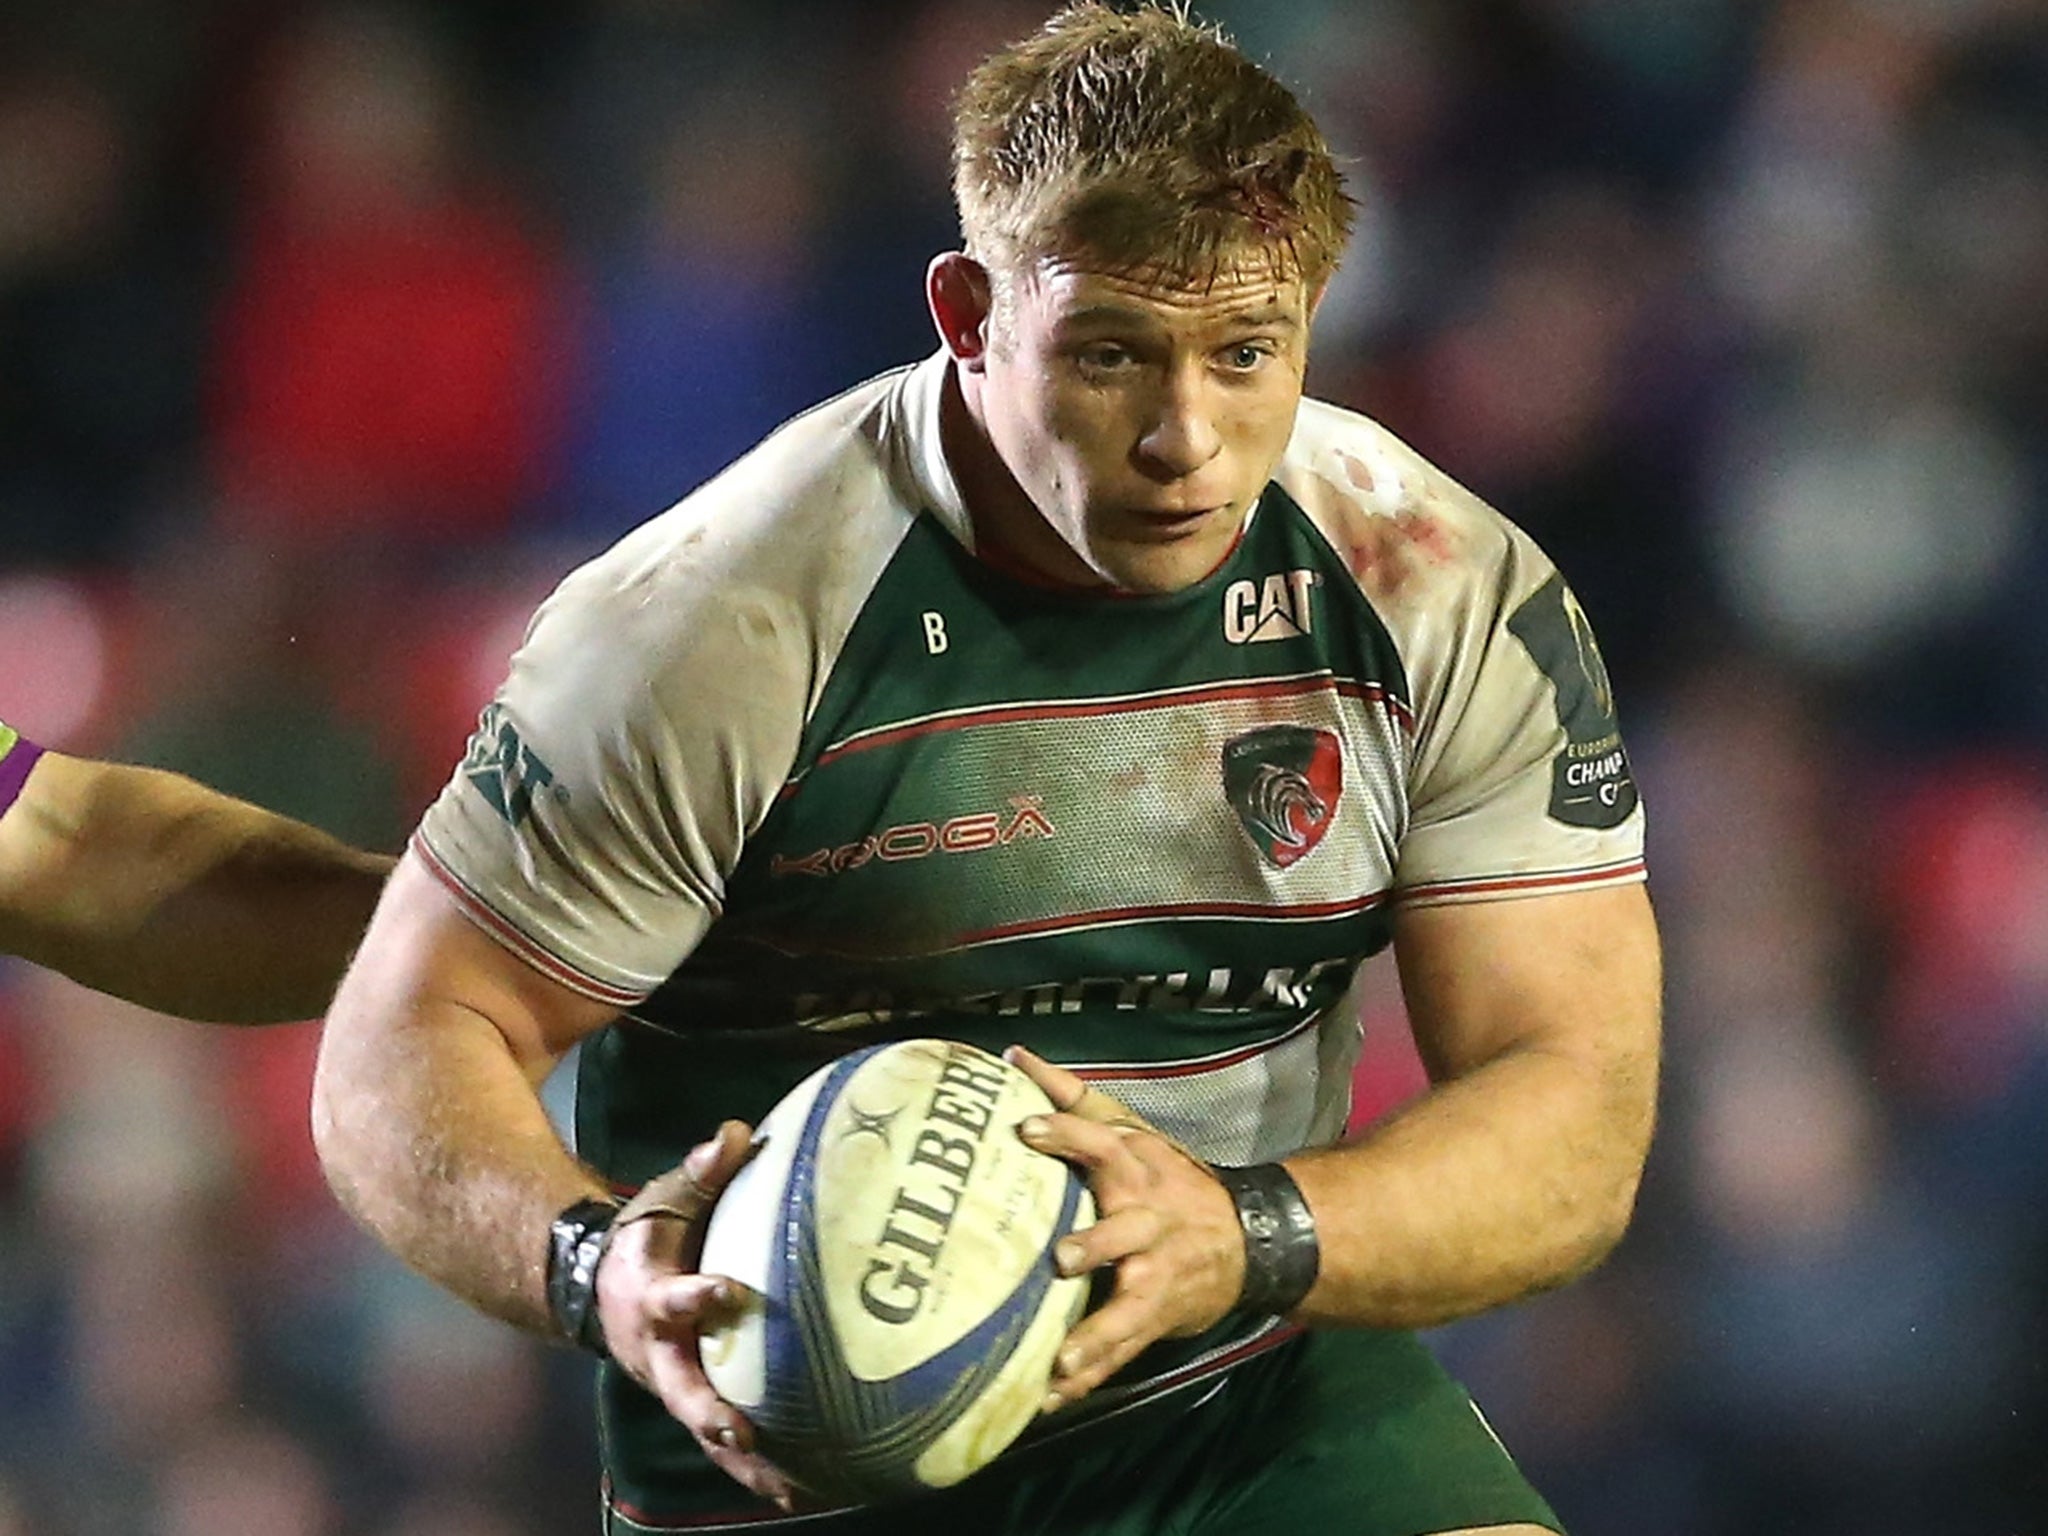 Tom Youngs will captain Leicester today, hoping to impress the England coach, Eddie Jones